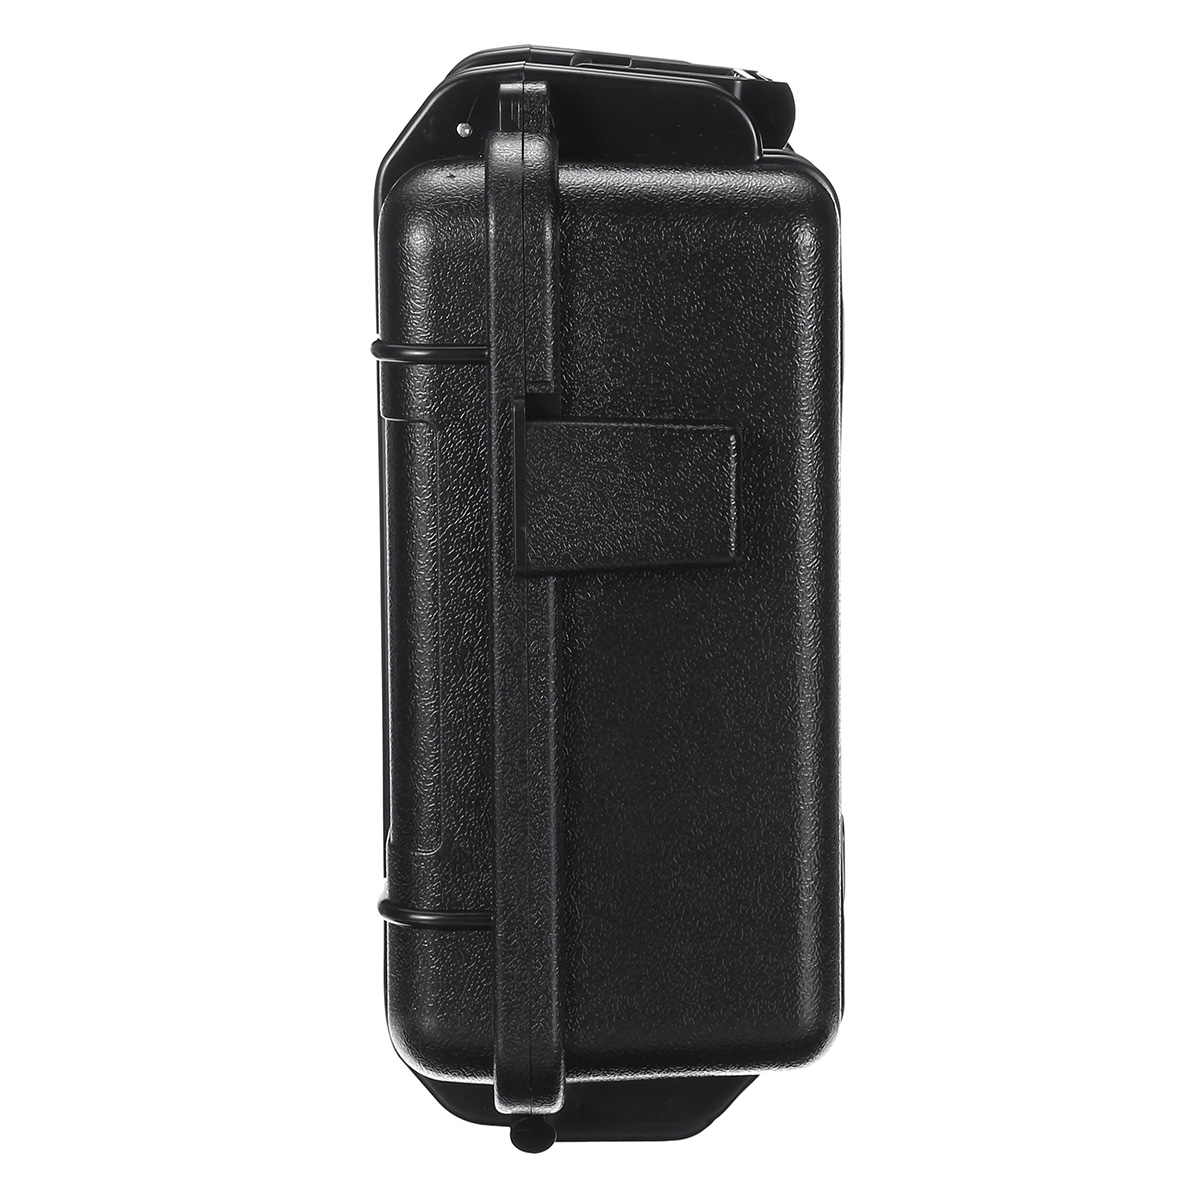 Outdoor-Portable-EDC-Instrument-Tool-Kits-Box-Waterproof-Shockproof-Protective-Safety-Storage-Case-1553948-6